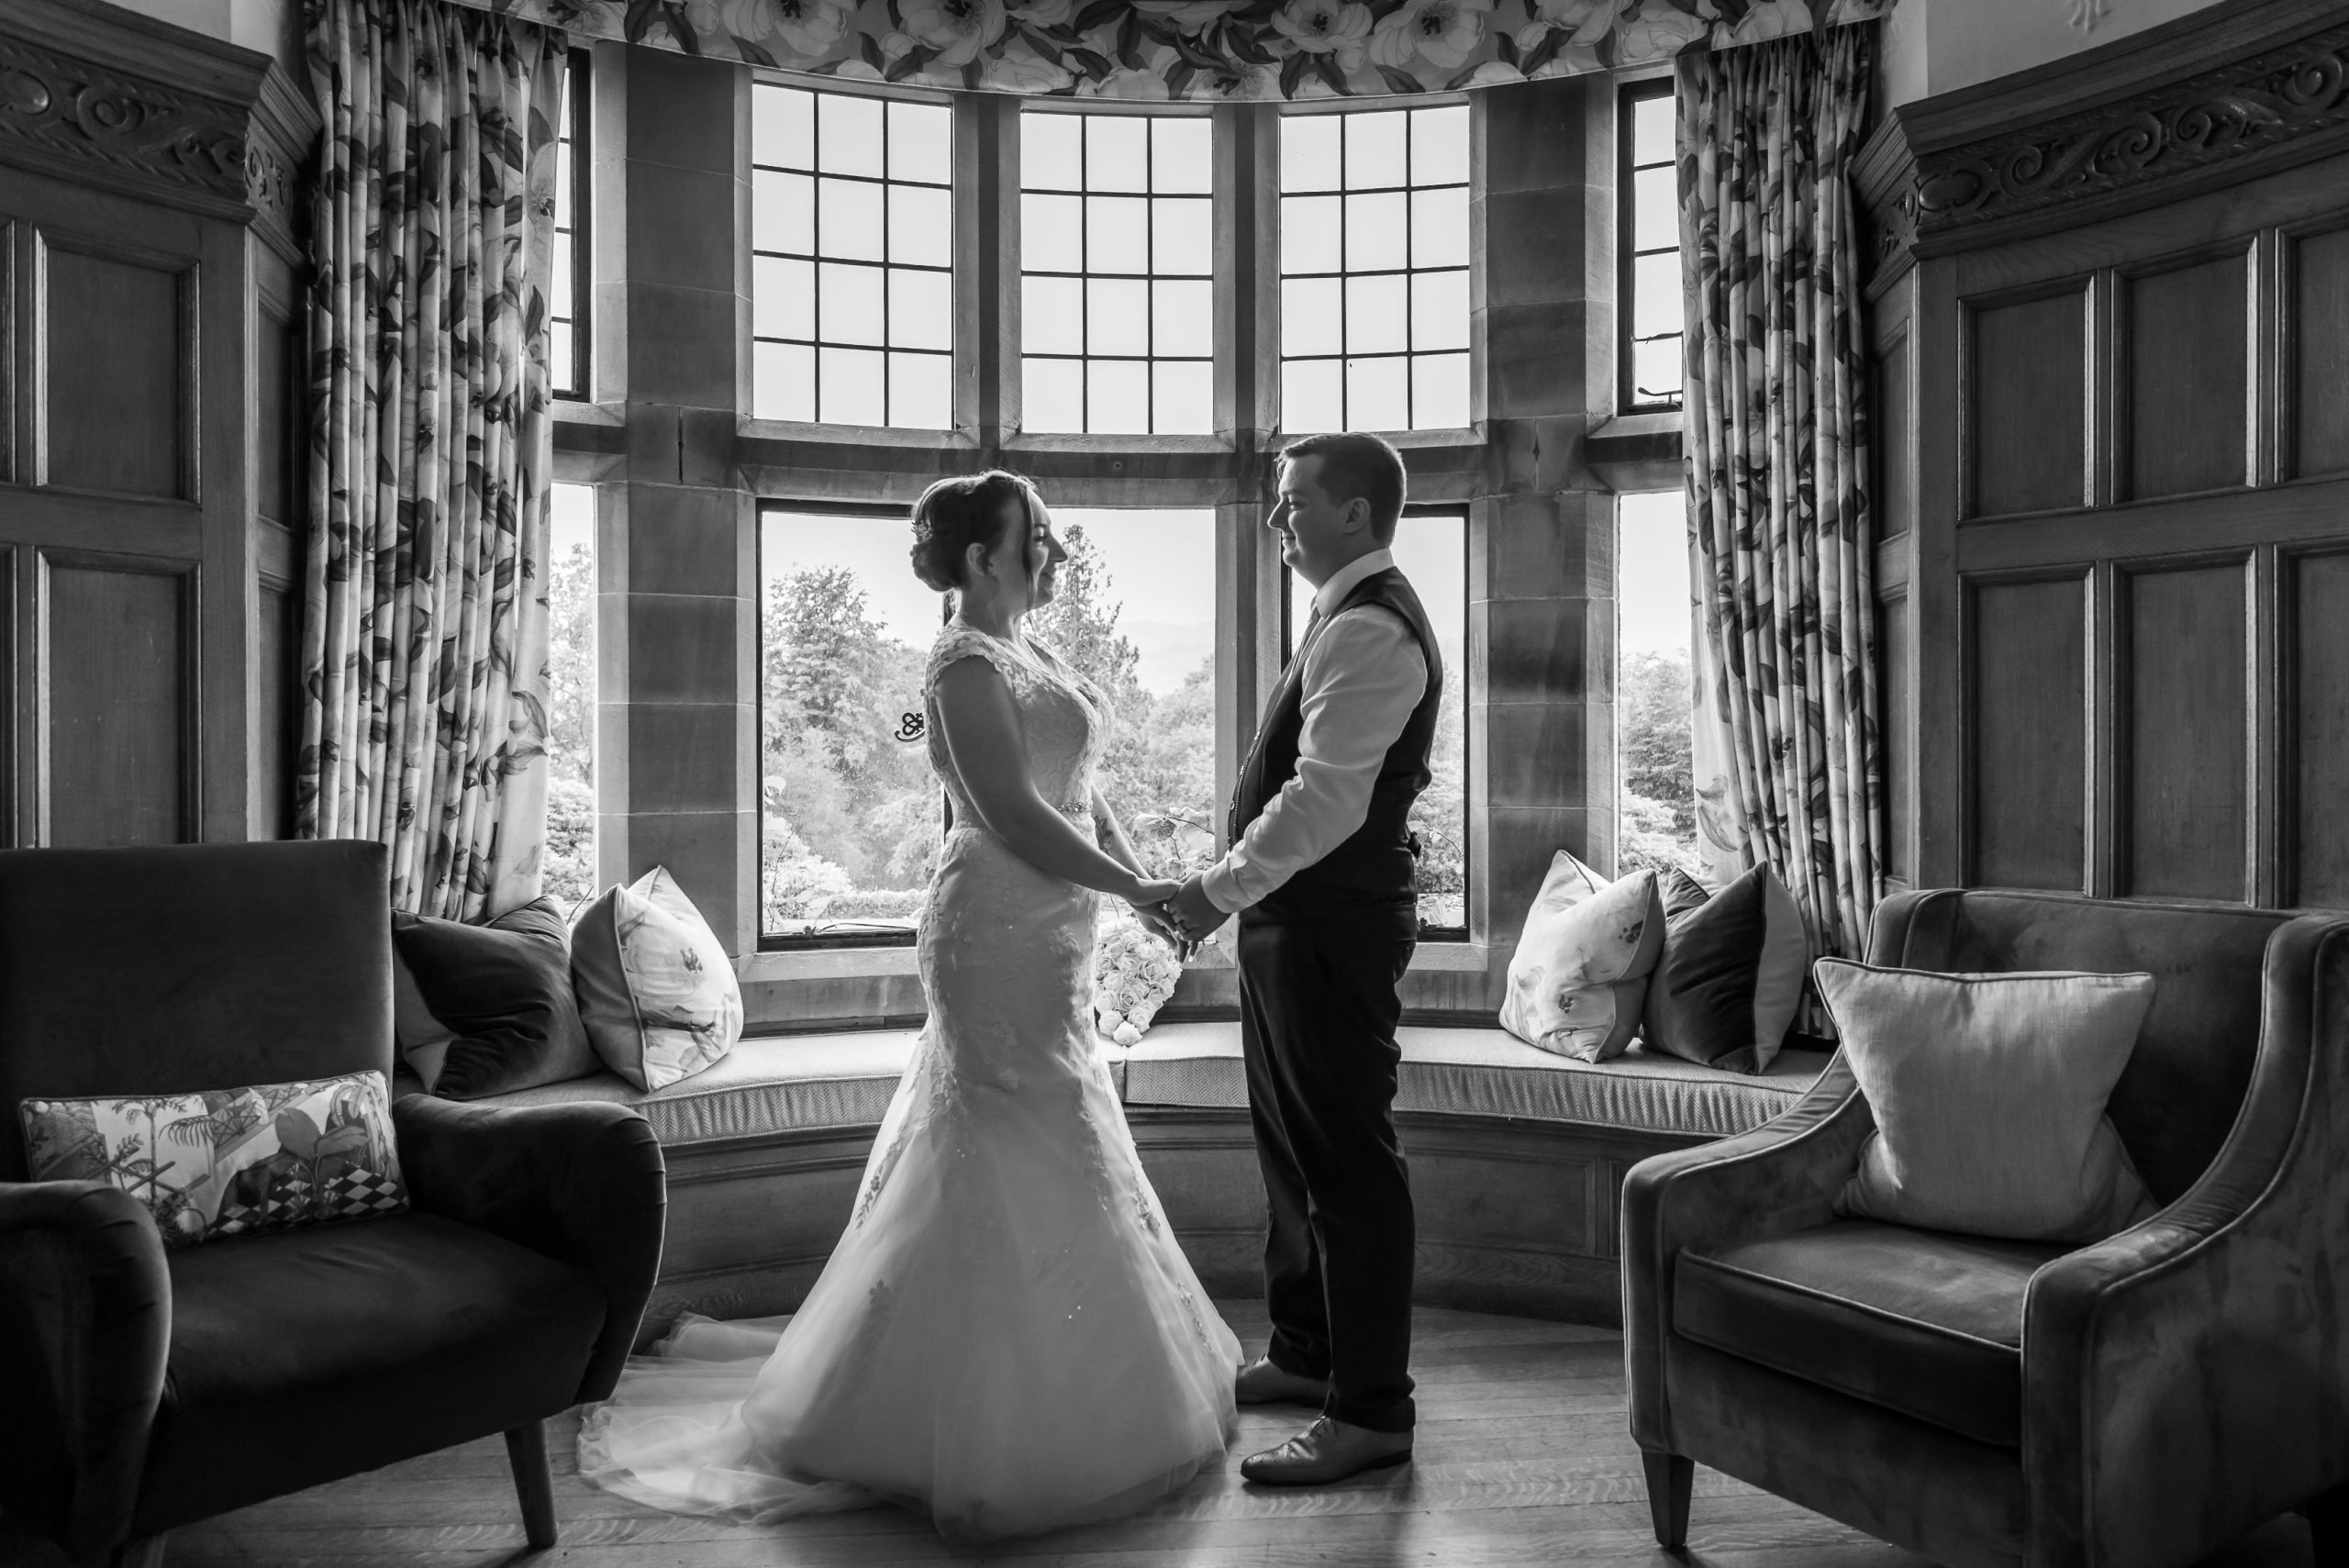 Lake District Wedding Bliss: Newlyweds Share Intimate Moment | Capture Your Dream Wedding